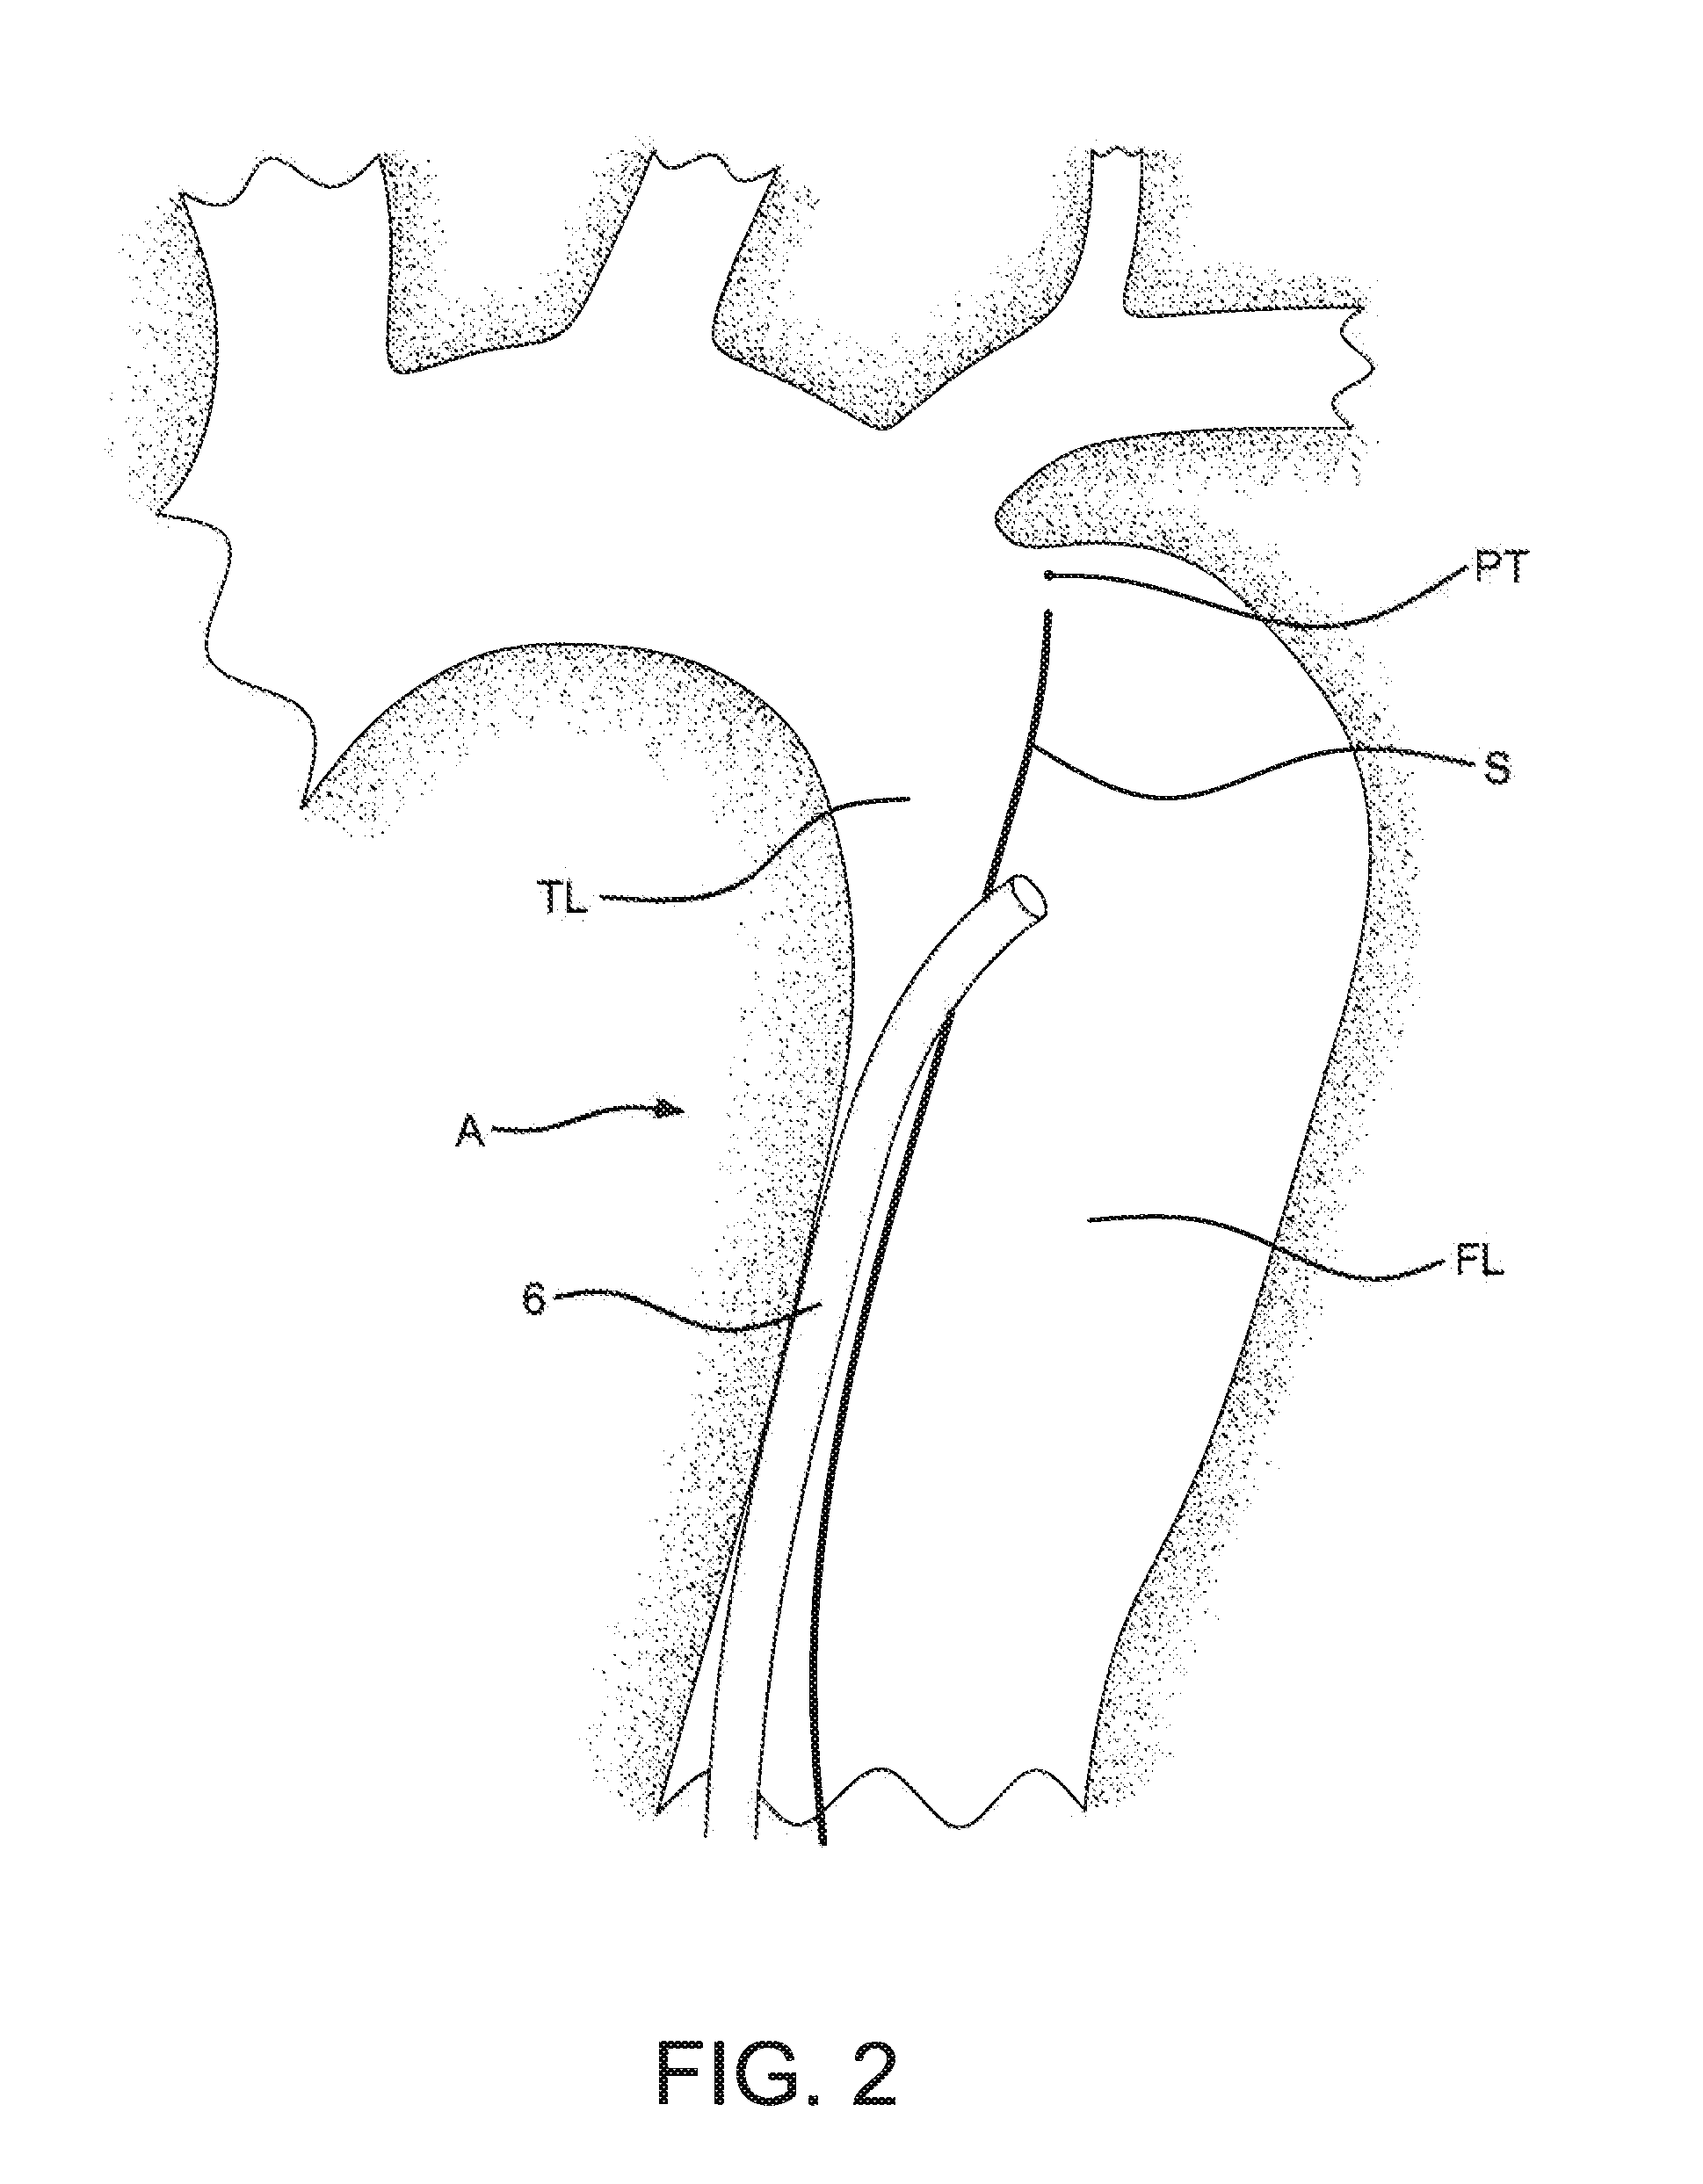 Method of using an aortic dissection septal cutting tool